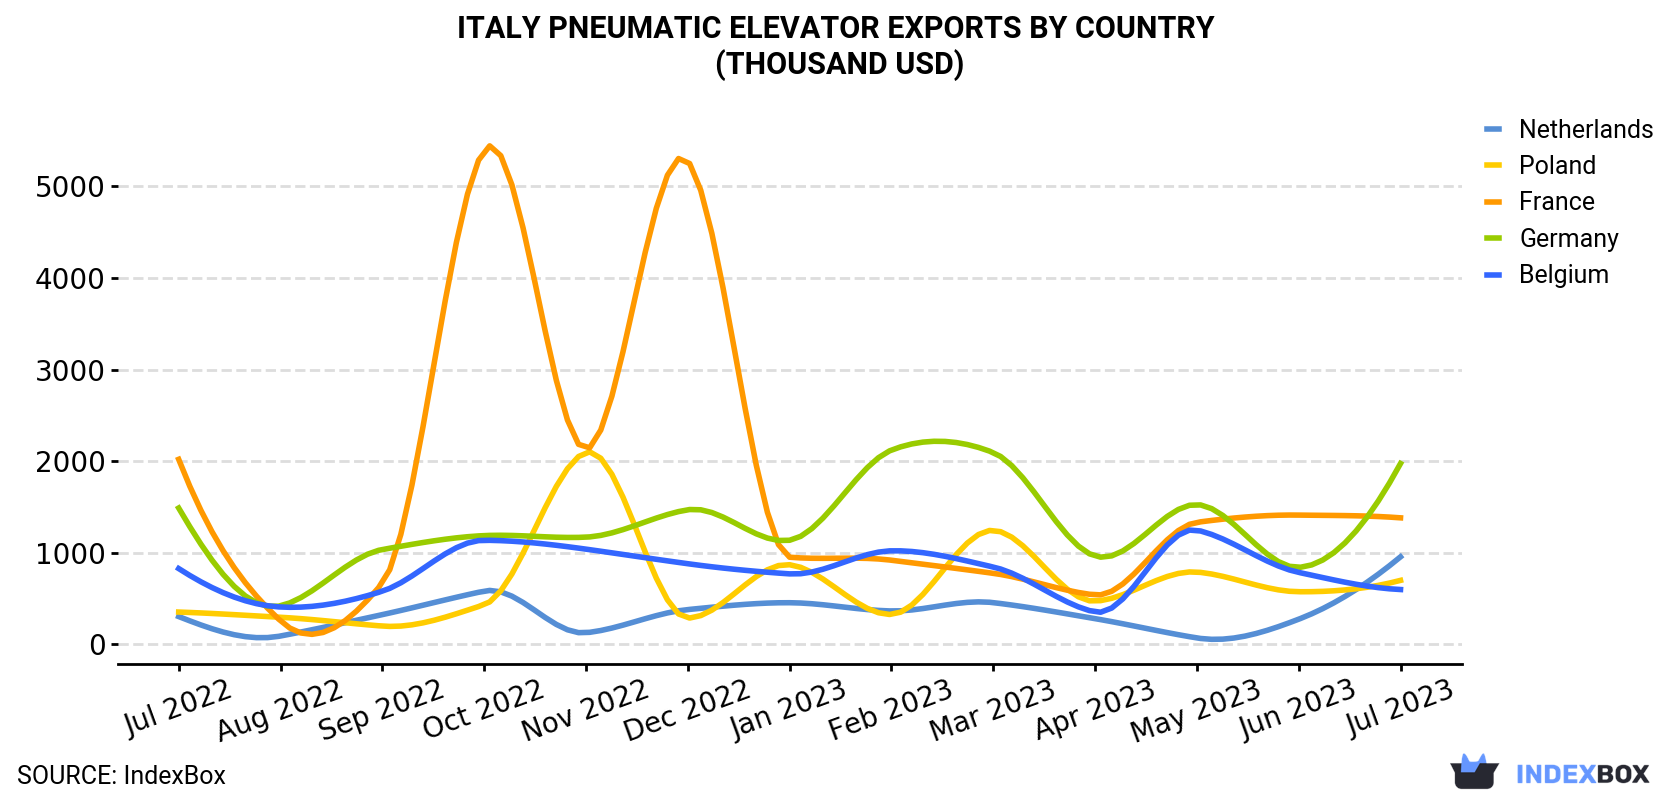 Italy Pneumatic Elevator Exports By Country (Thousand USD)